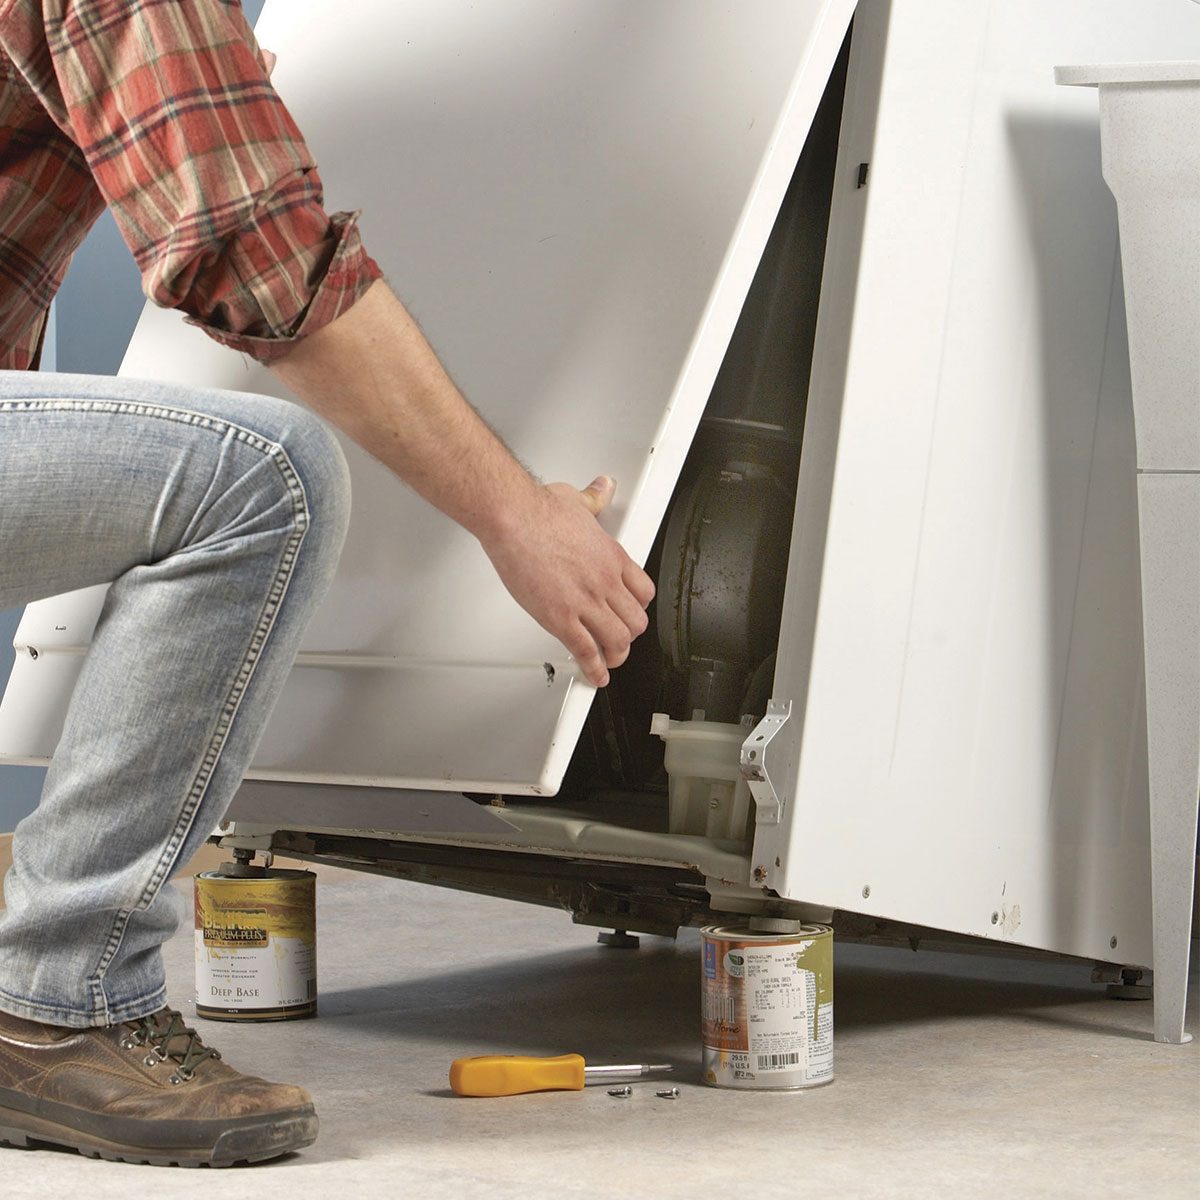 Appliance Repairs You Don't Need to Call a Pro For